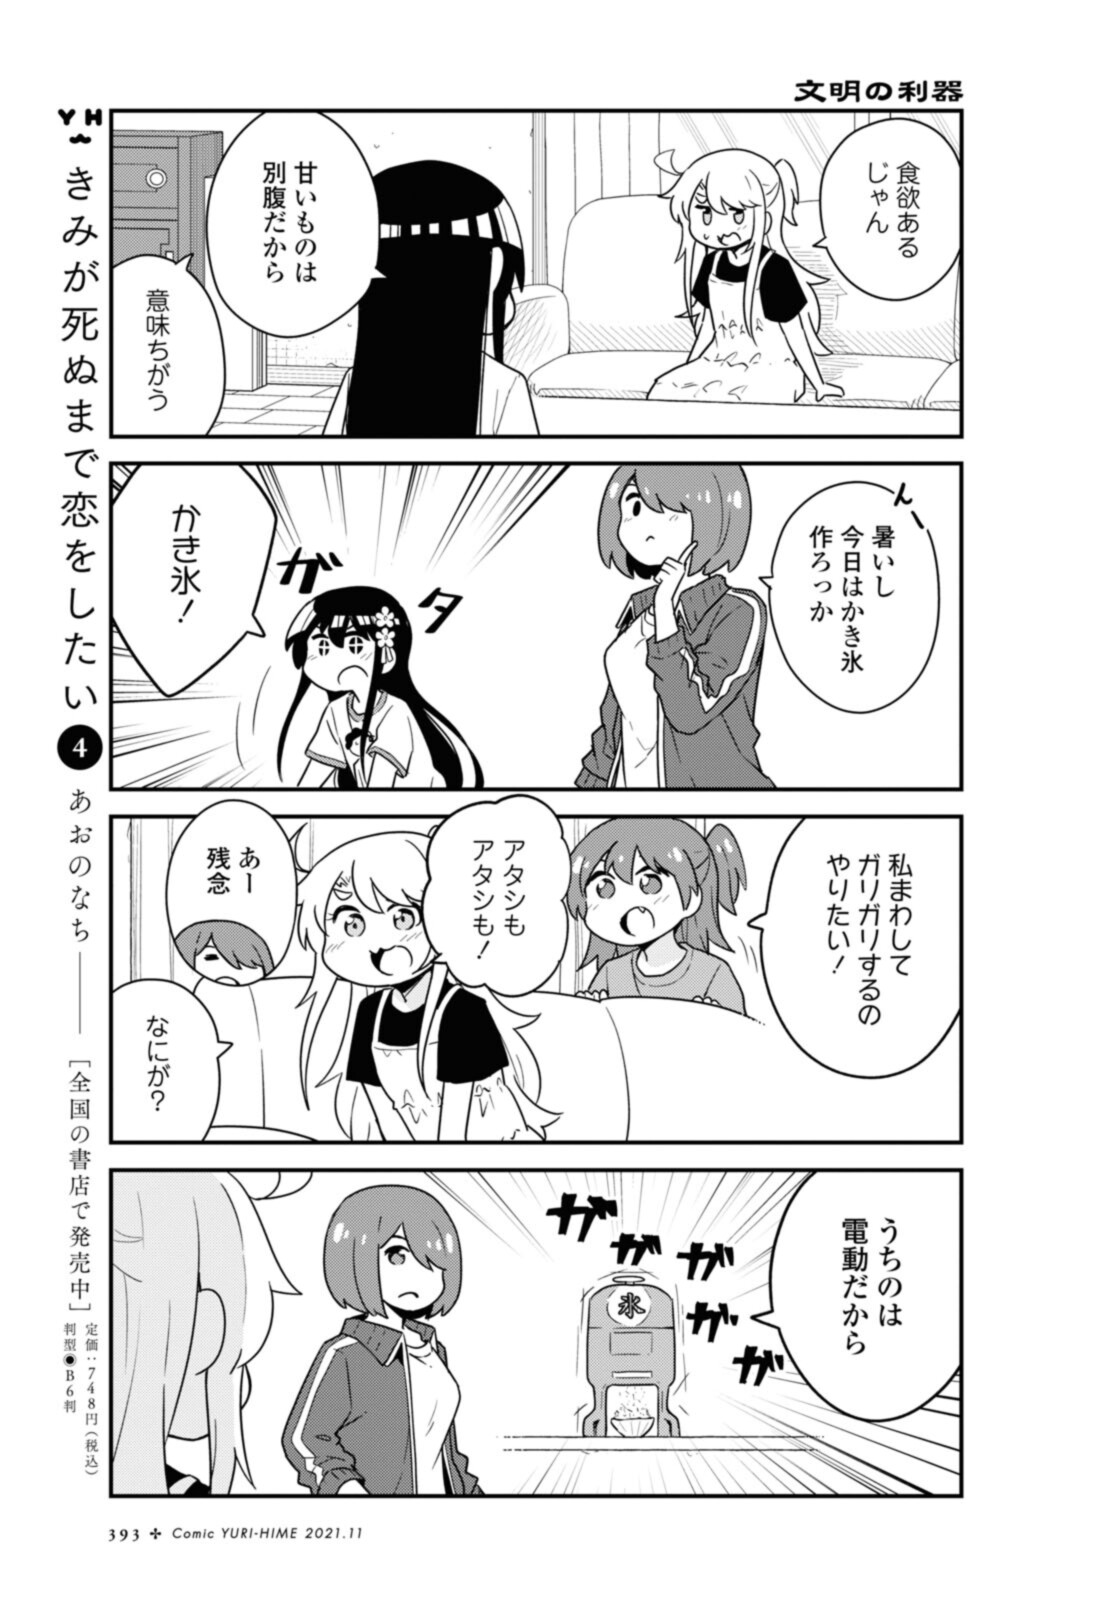 Wataten! An Angel Flew Down to Me 私に天使が舞い降りた！ 第88話 - Page 6